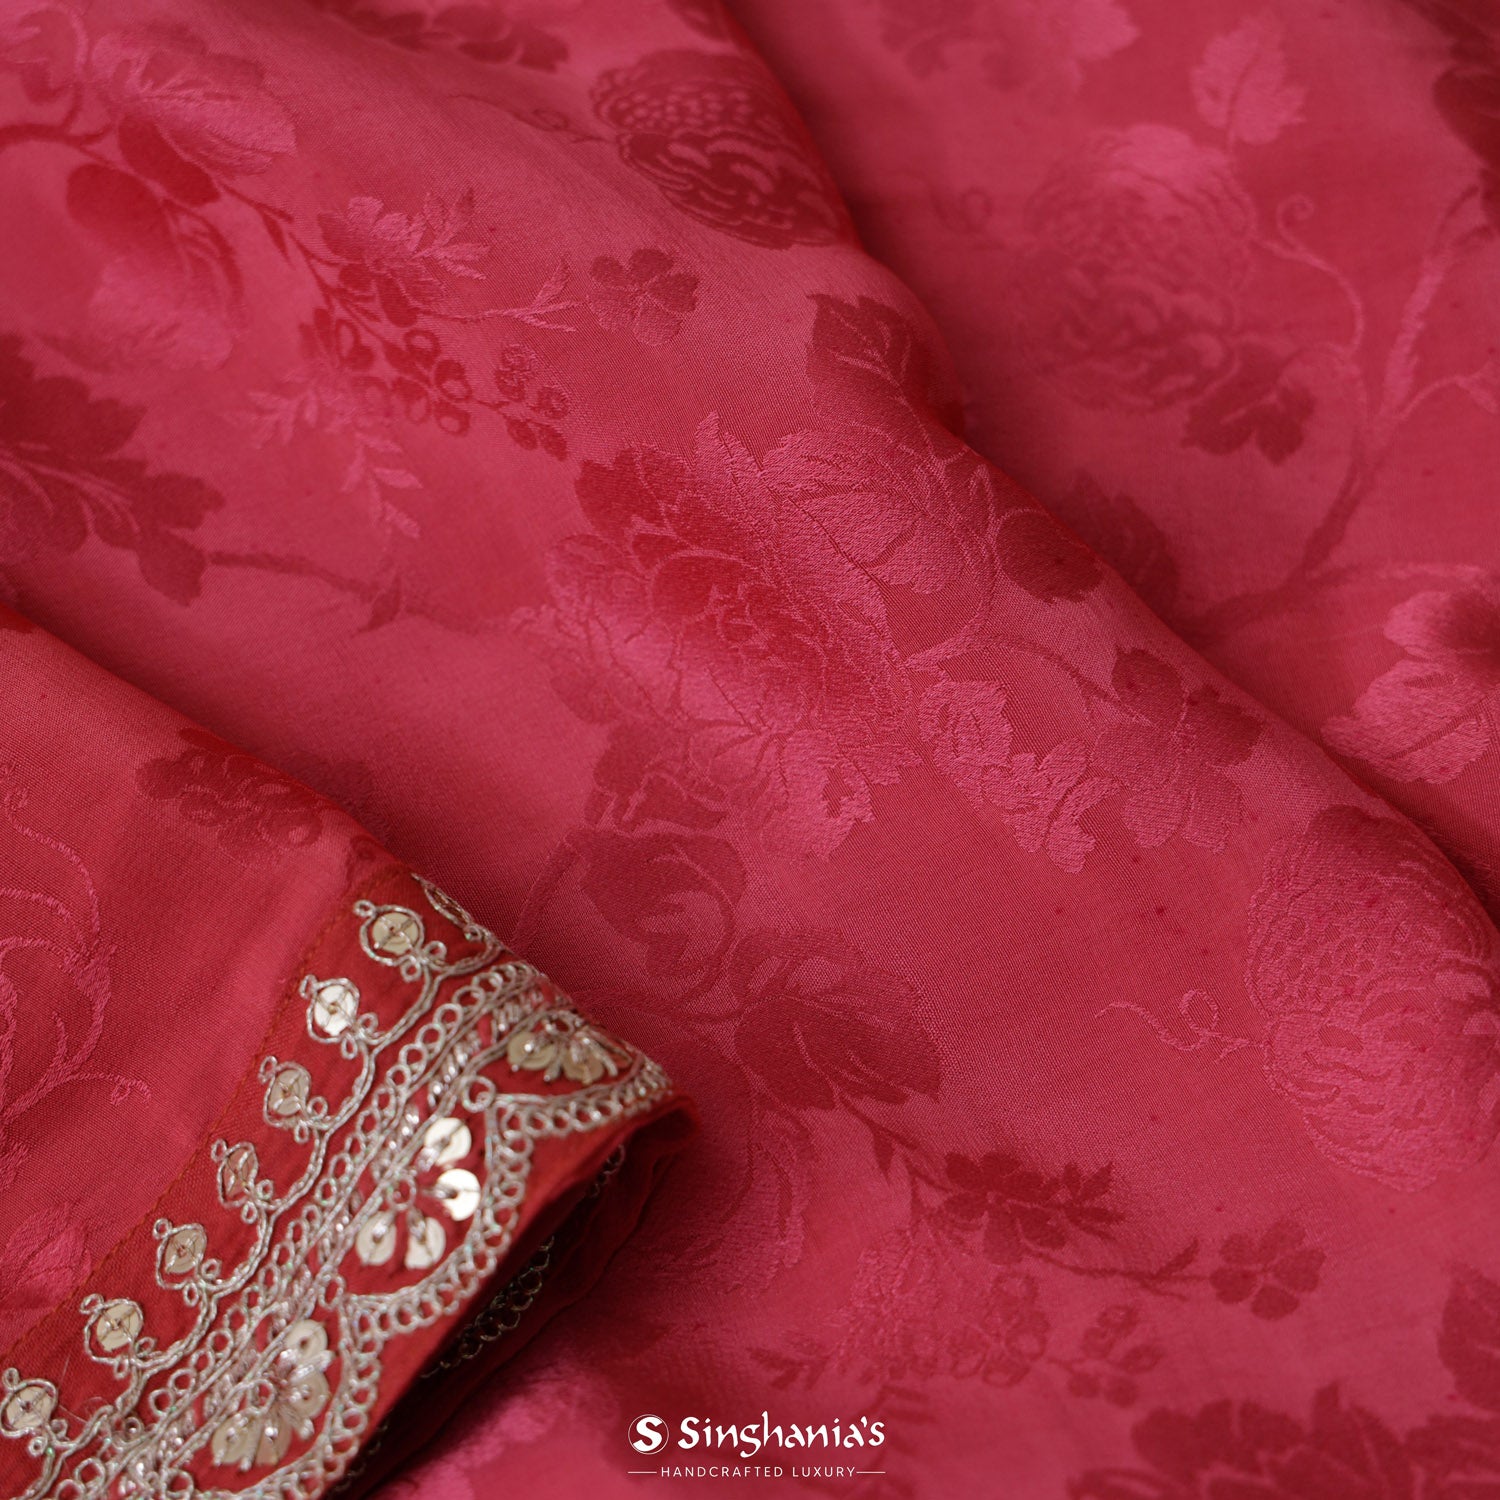 Watermelon Pink Satin Saree With Self Woven Floral Pattern